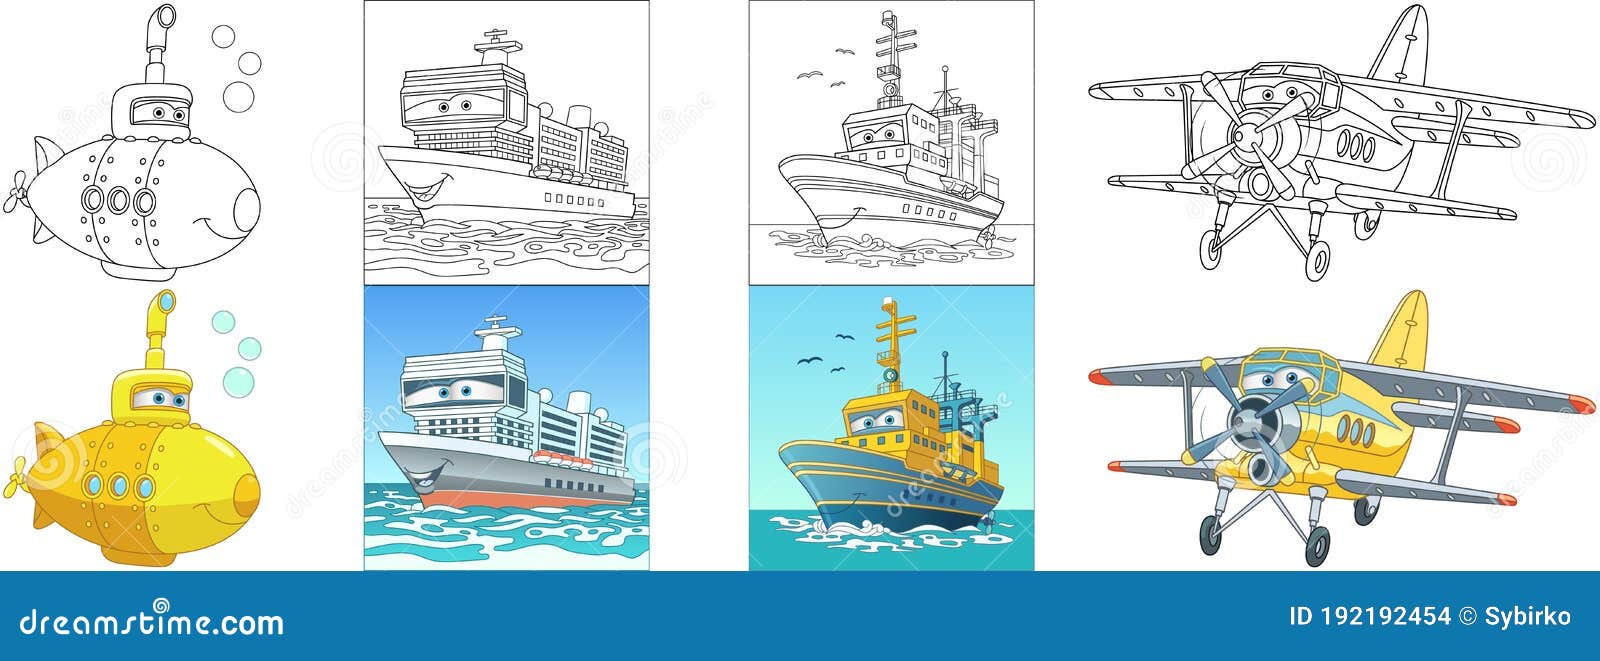 Coloring pages for kids flying and navy cars stock vector